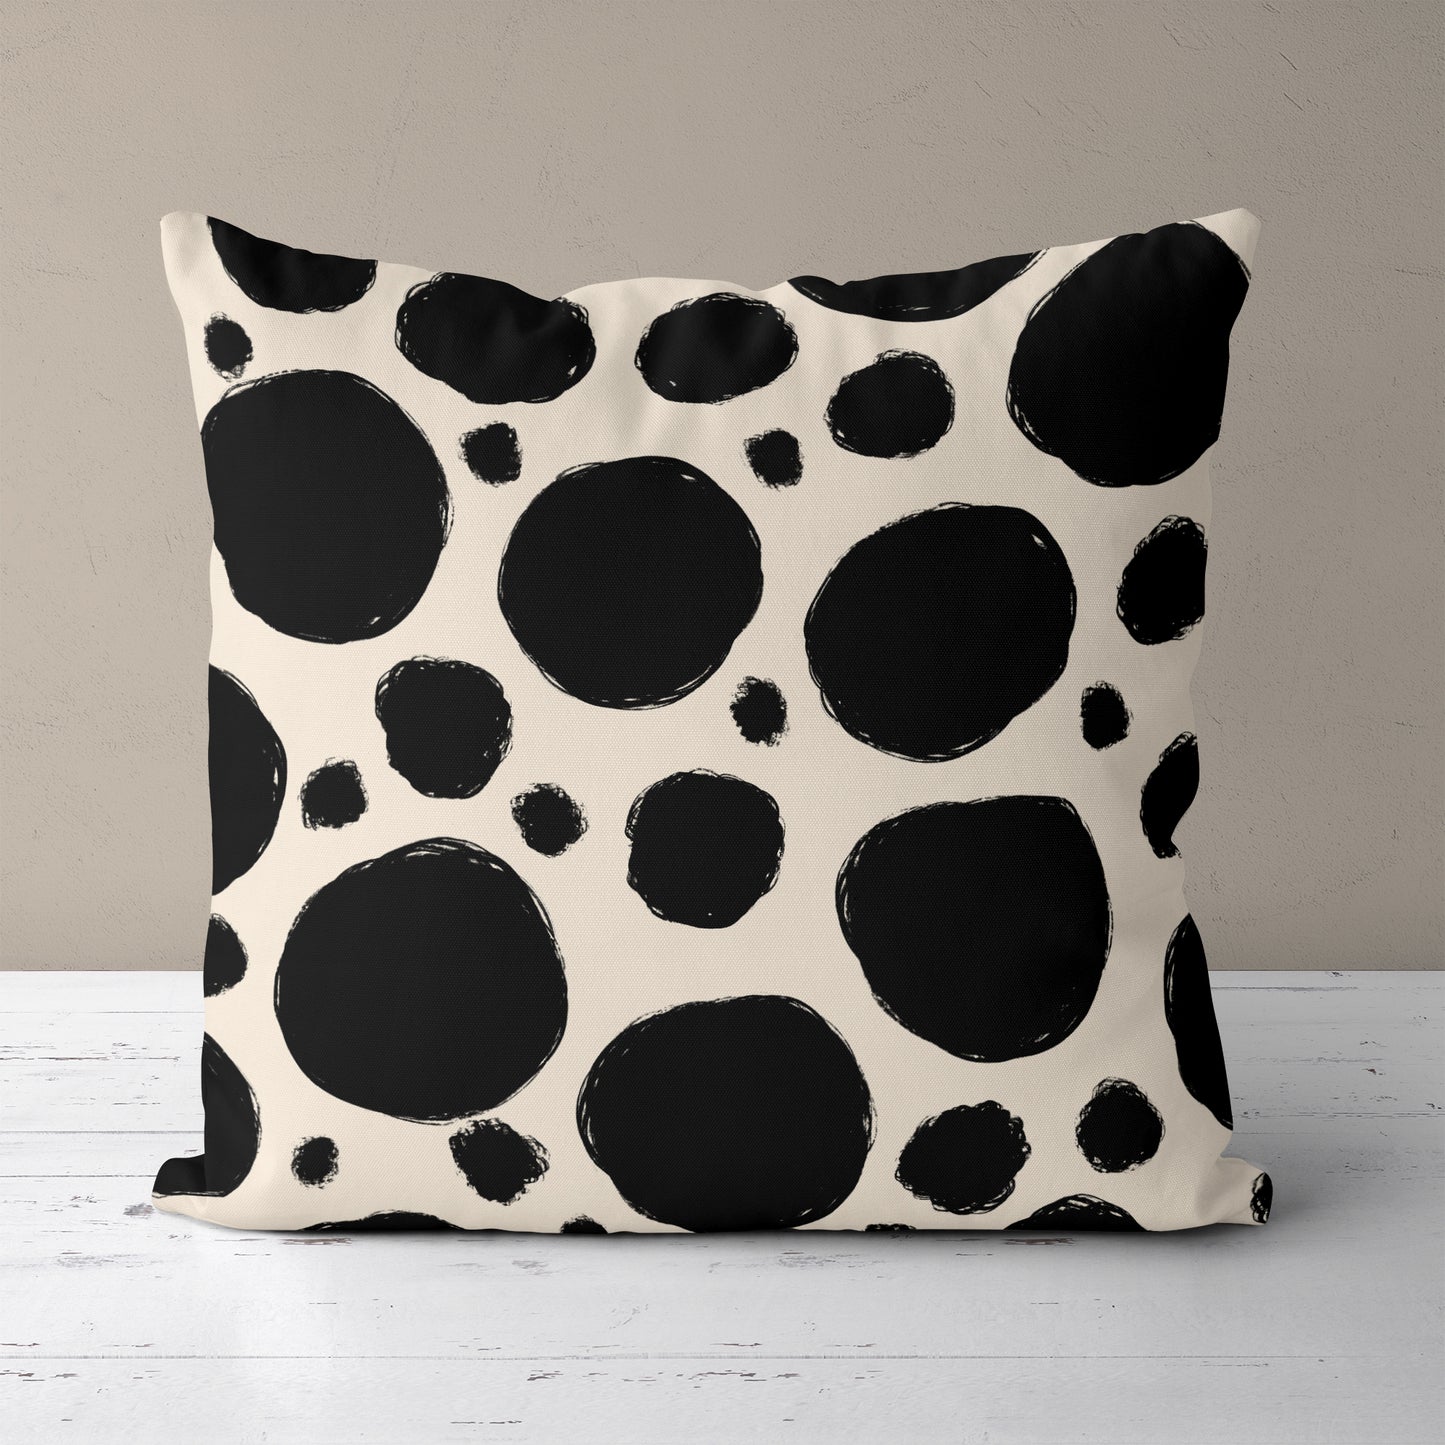 Throw Pillow with Black Dots